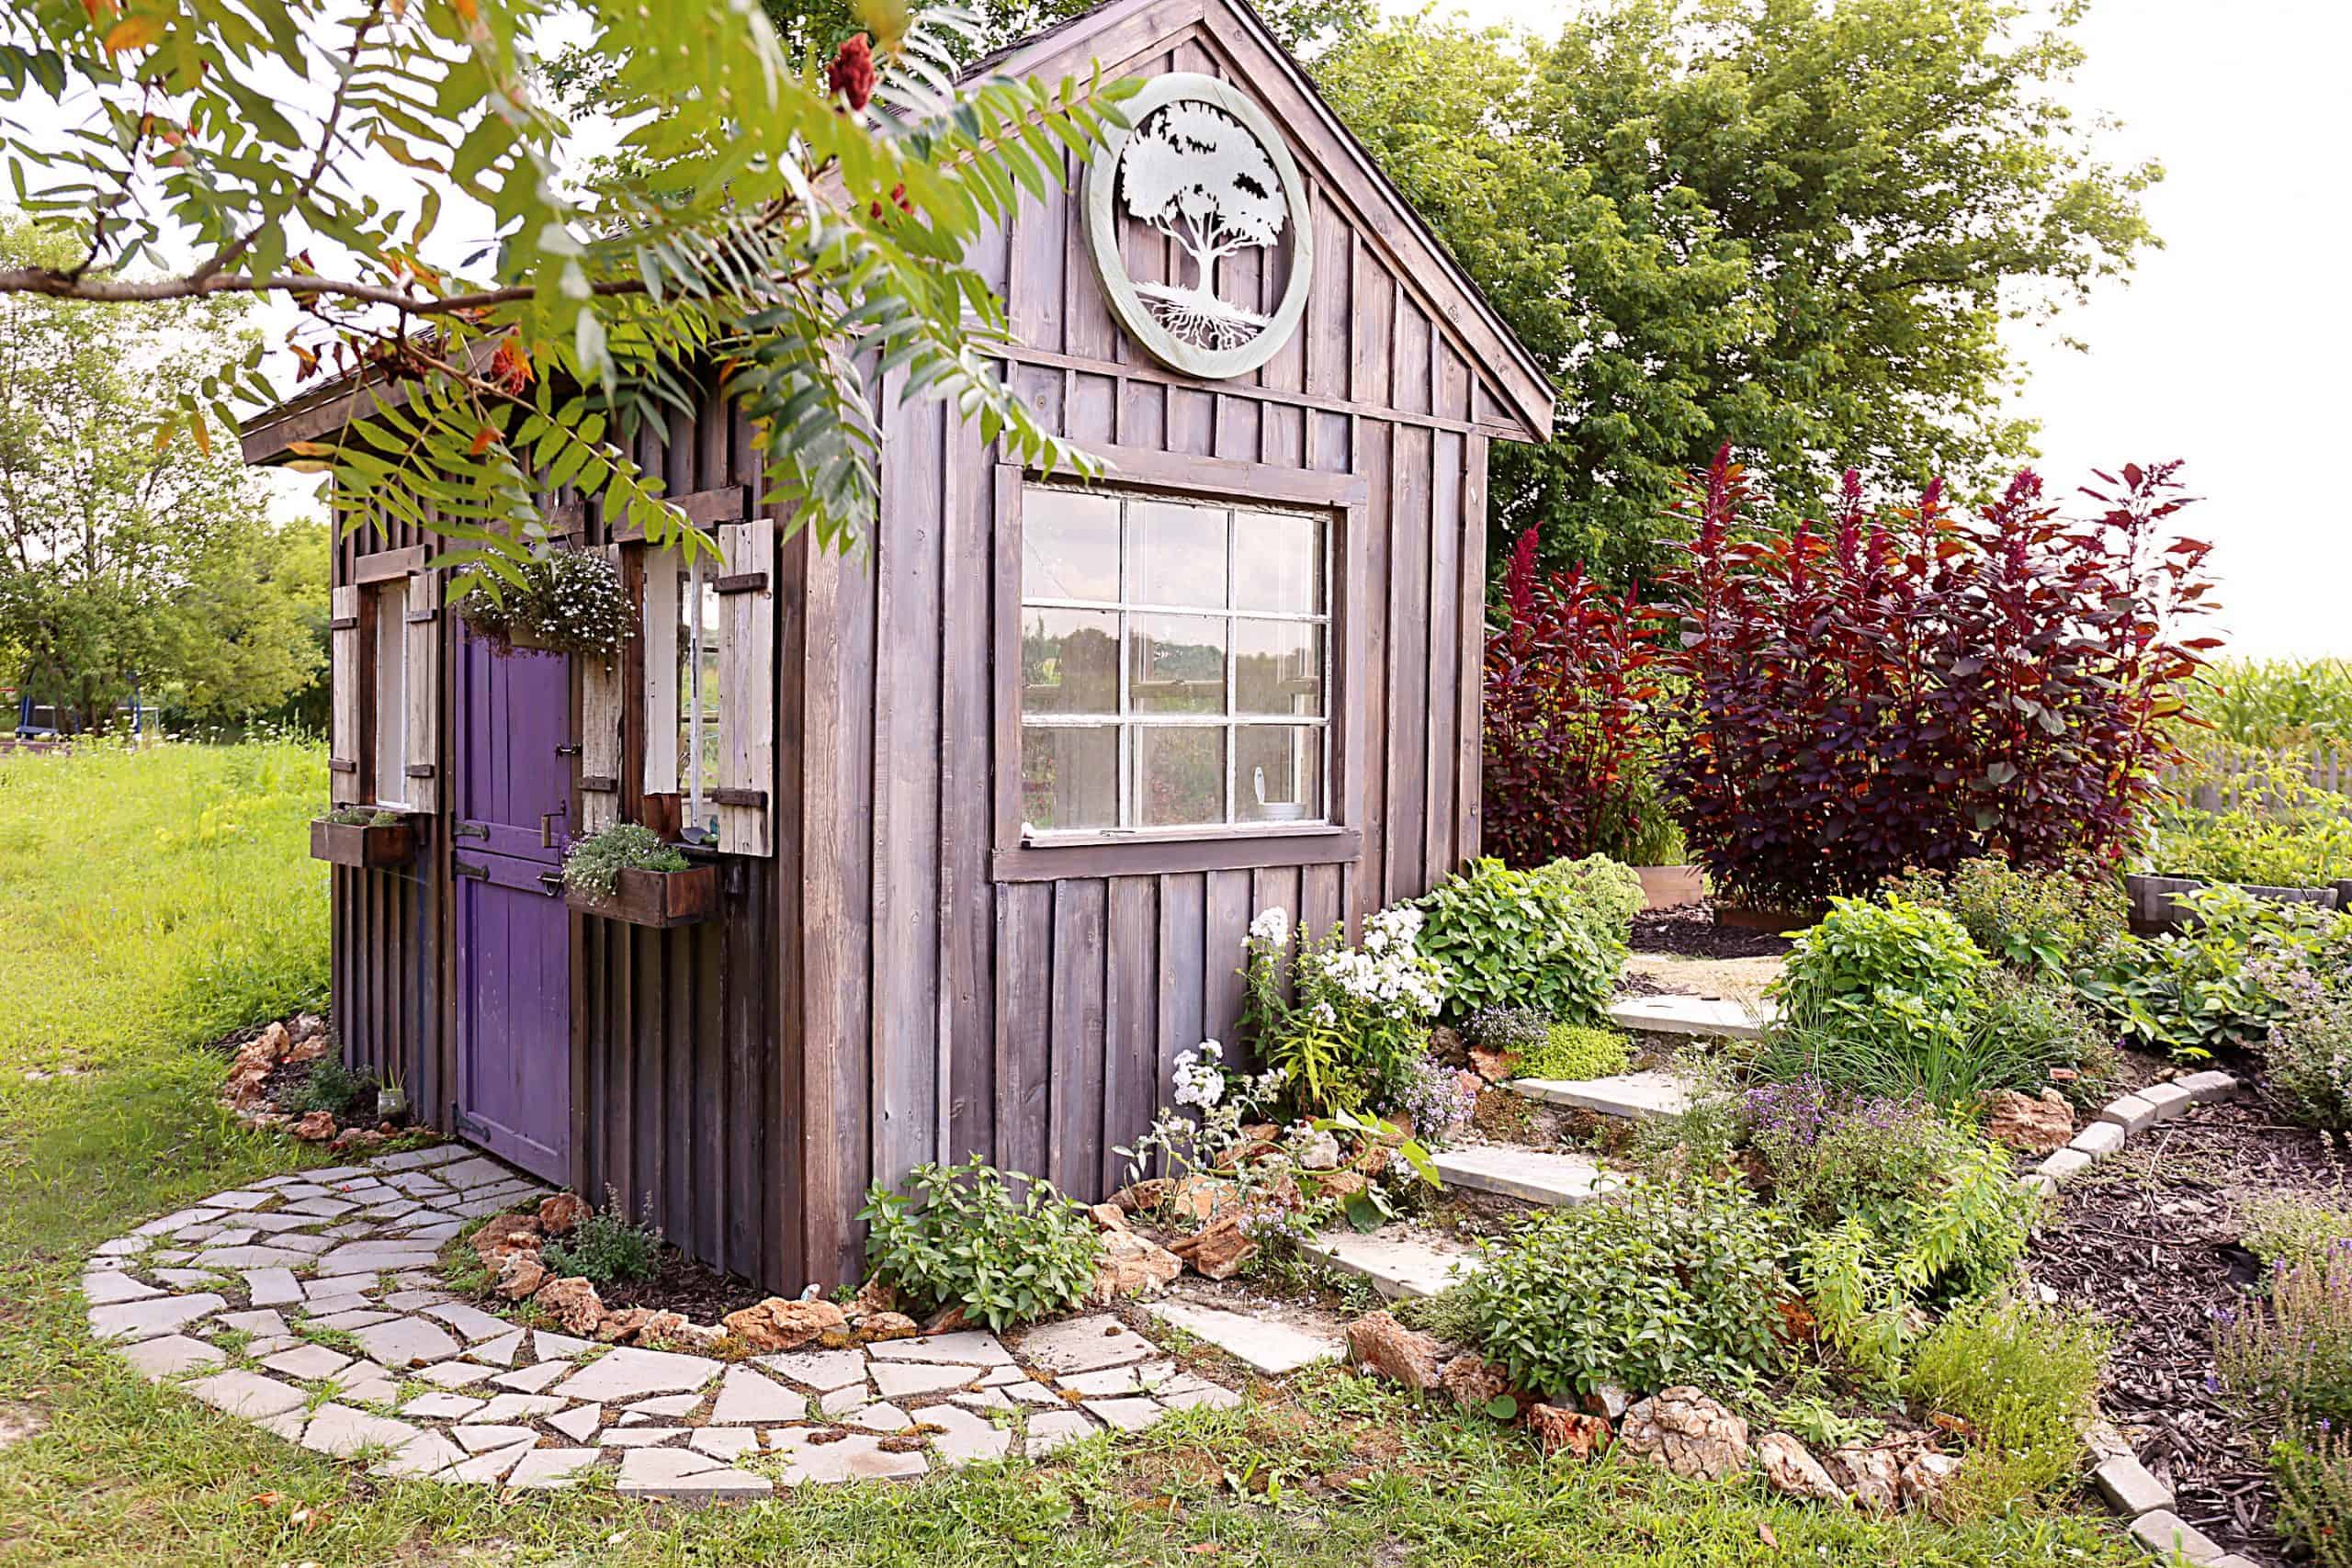 Turn Your Old Furniture into a Fairytale Garden